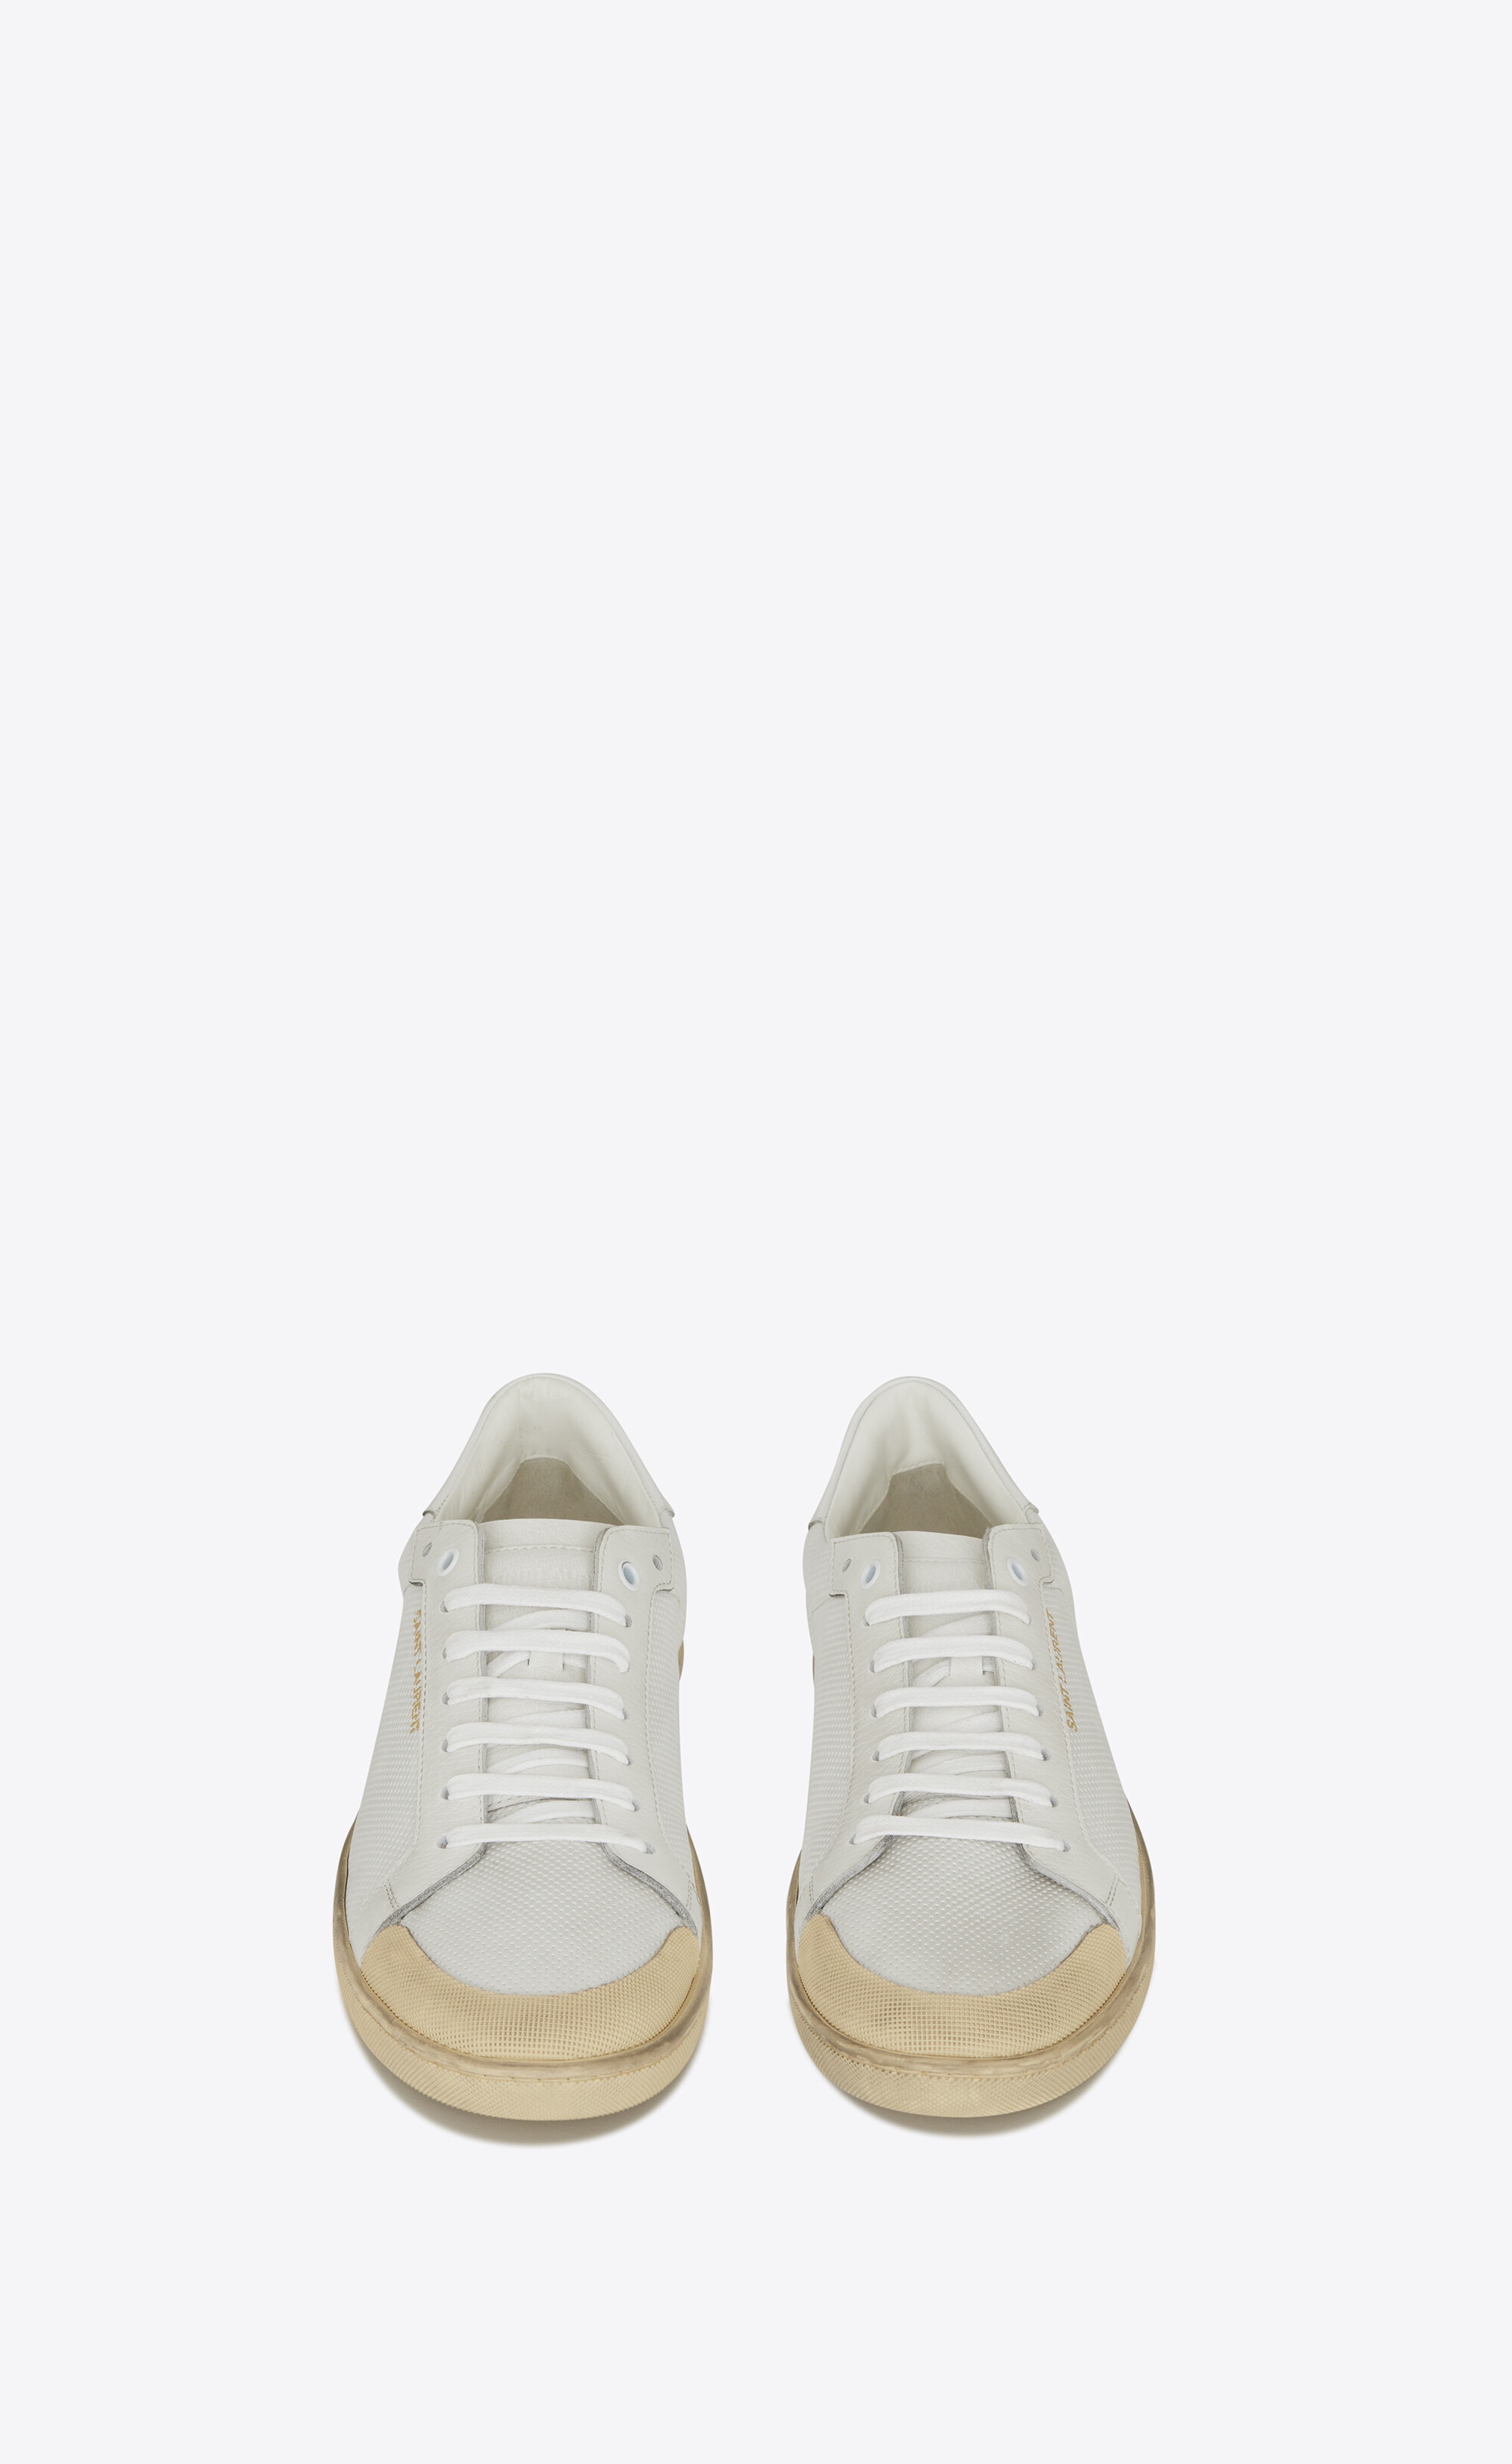 court classic sl/39 sneakers in perforated leather - 2